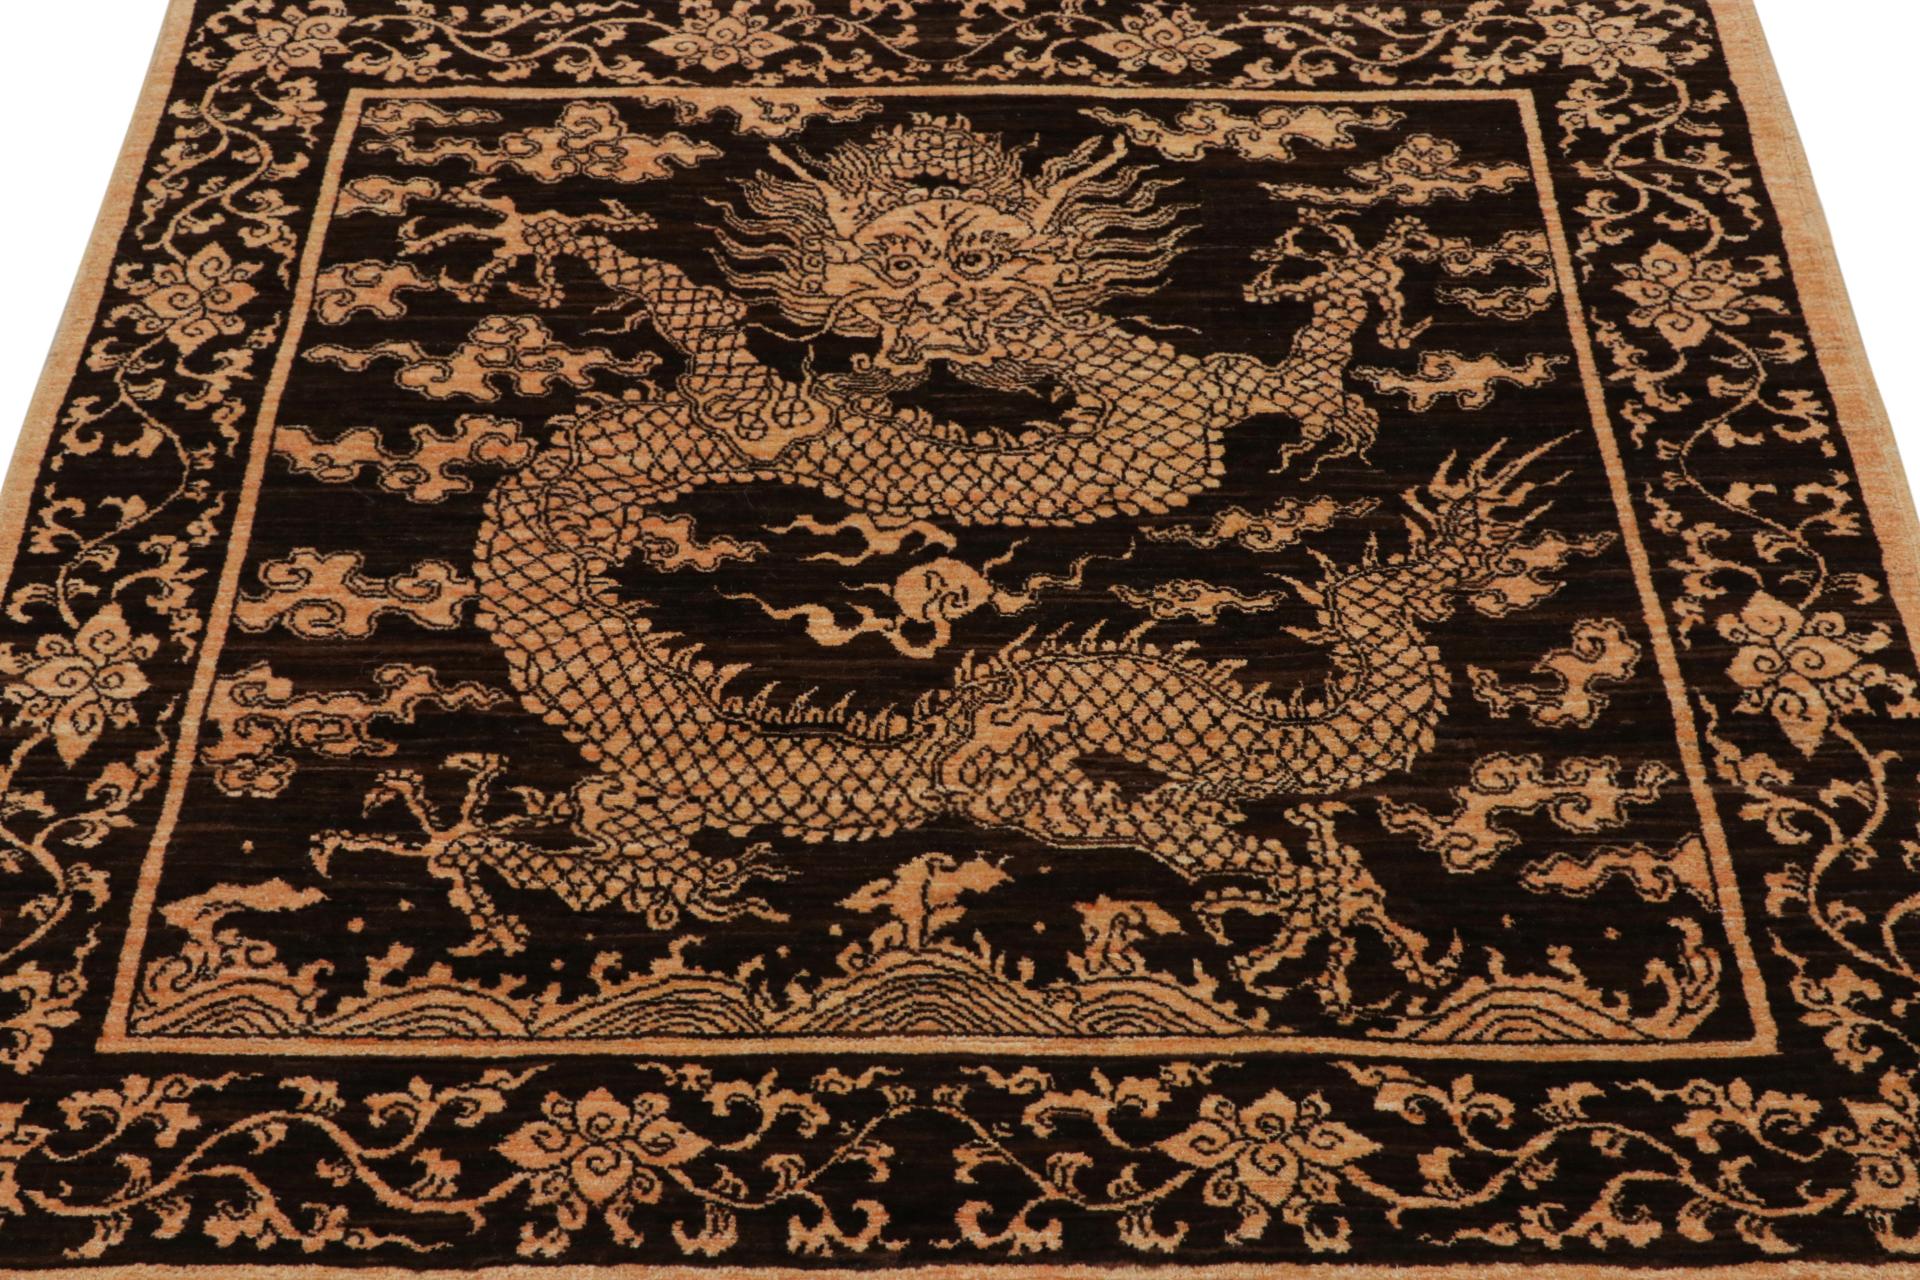 Afghan Rug & Kilim’s Chinese style Dragon Rug with Brown, Black and Gold Pictorials For Sale